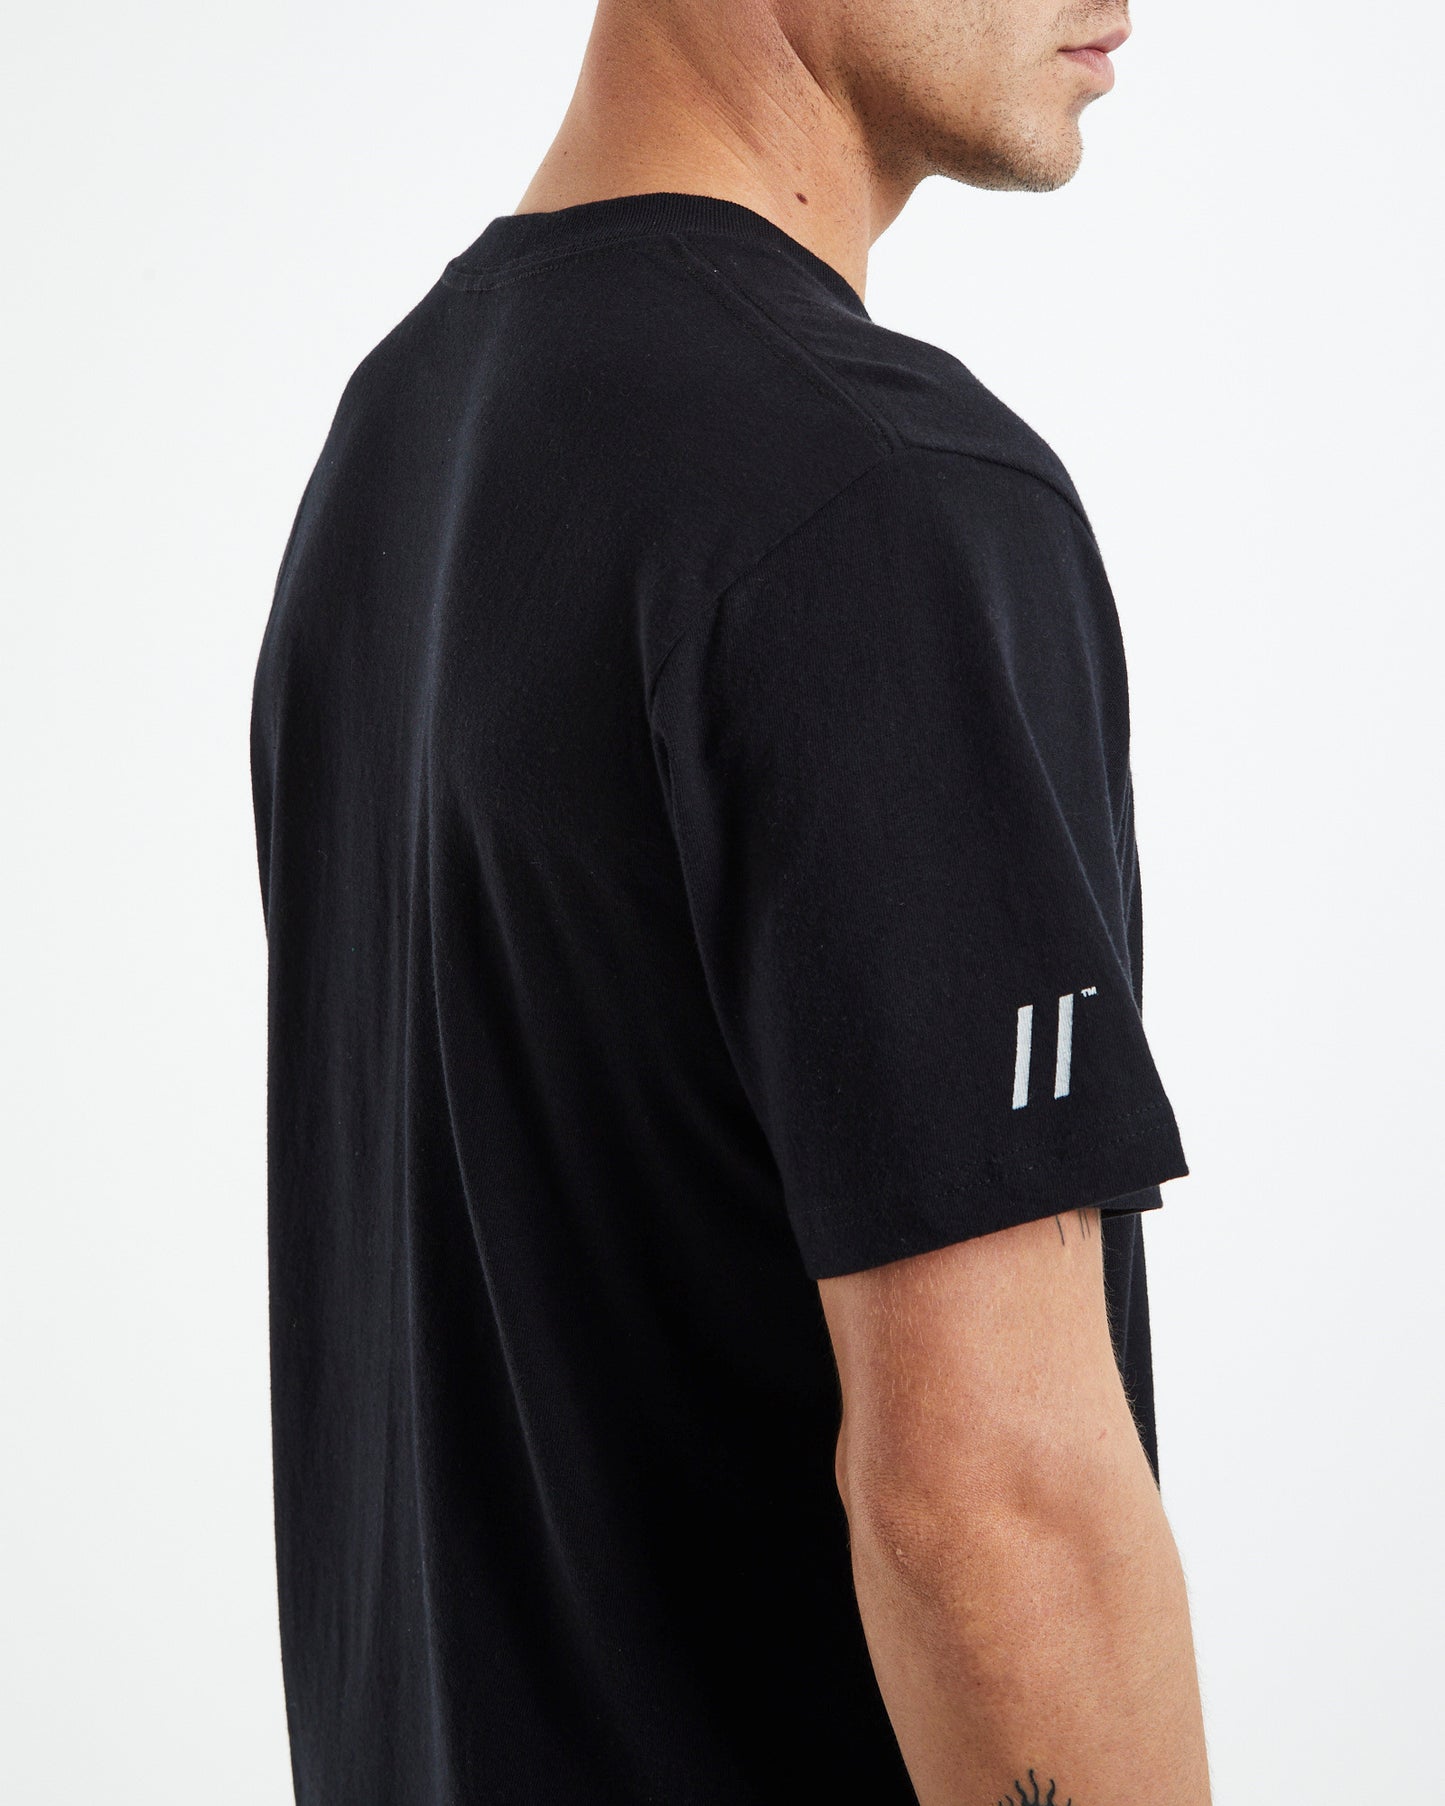 MISFIT // Supercorporate 50/50 SS Tee PITCH BLACK / WHITE SAND